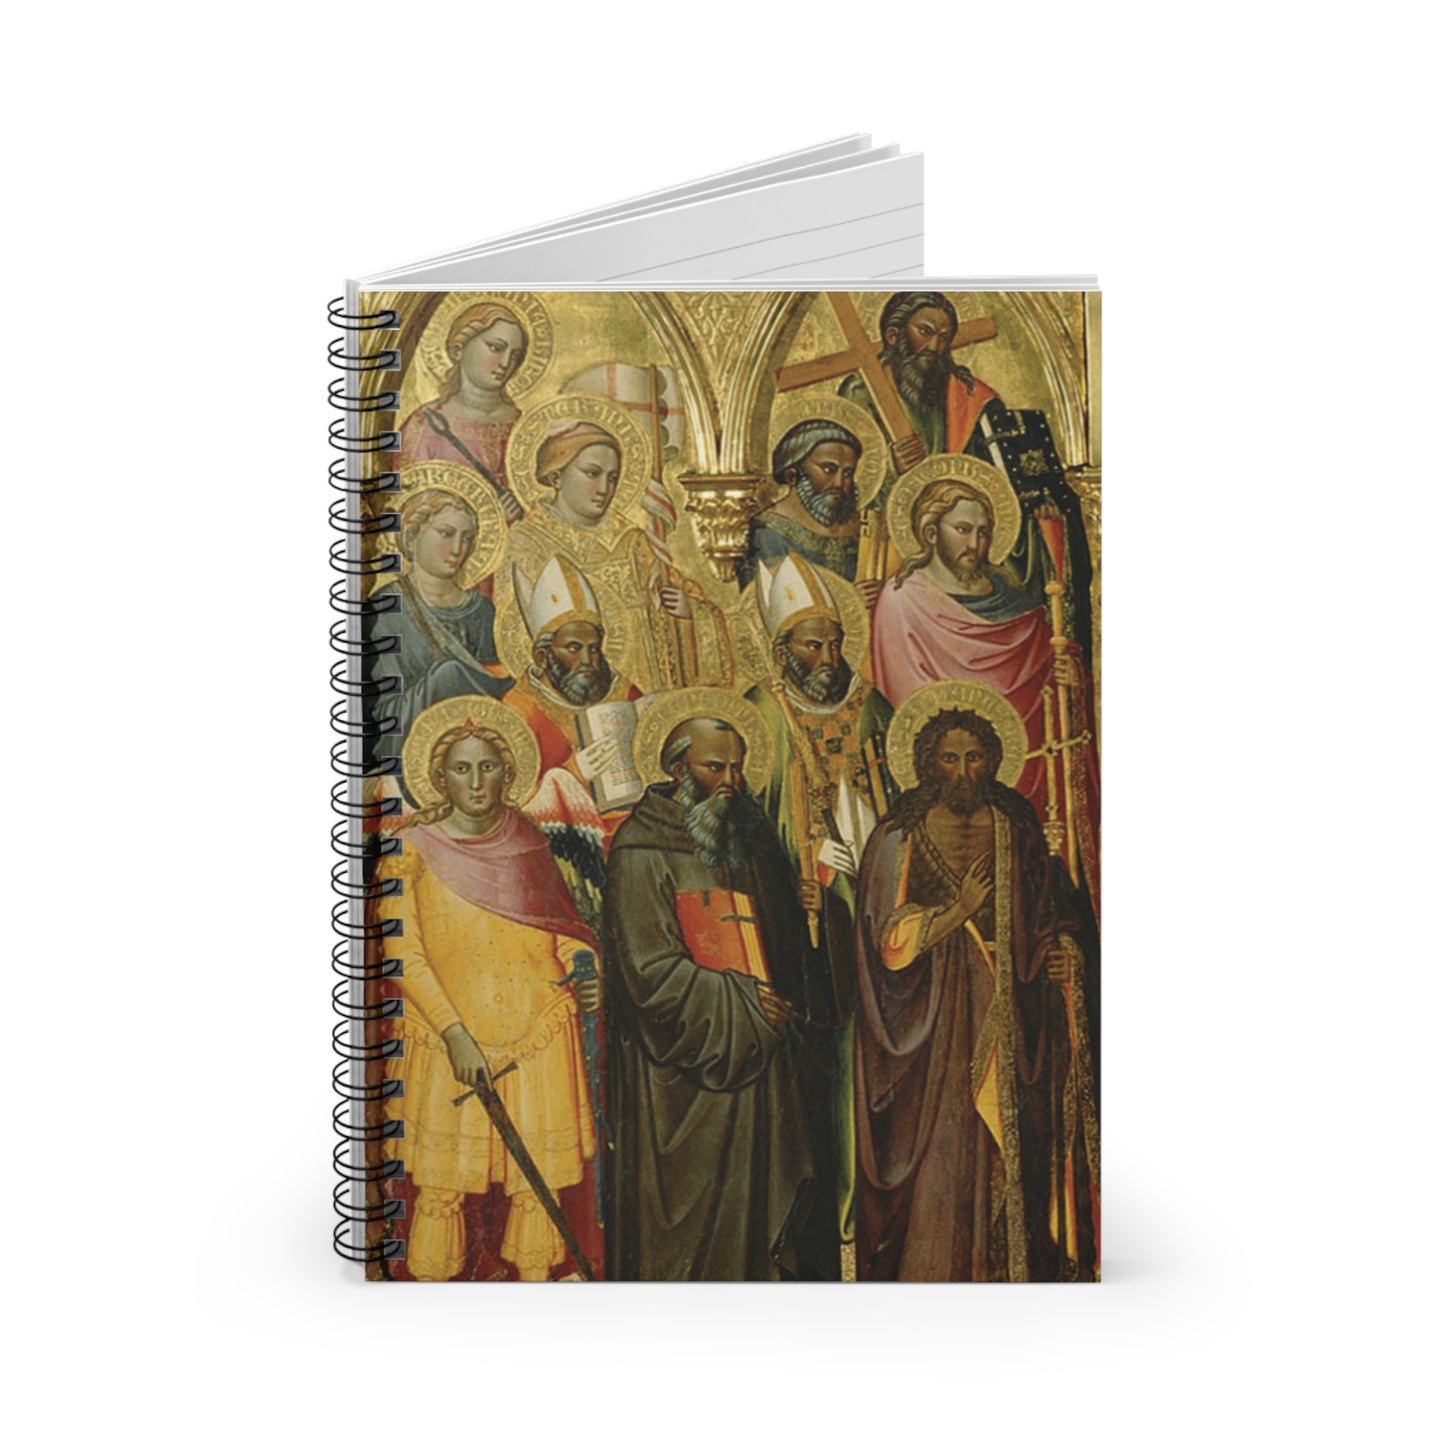 Spiral Notebook-Polyptych with Coronation of the Virgin and Saints'